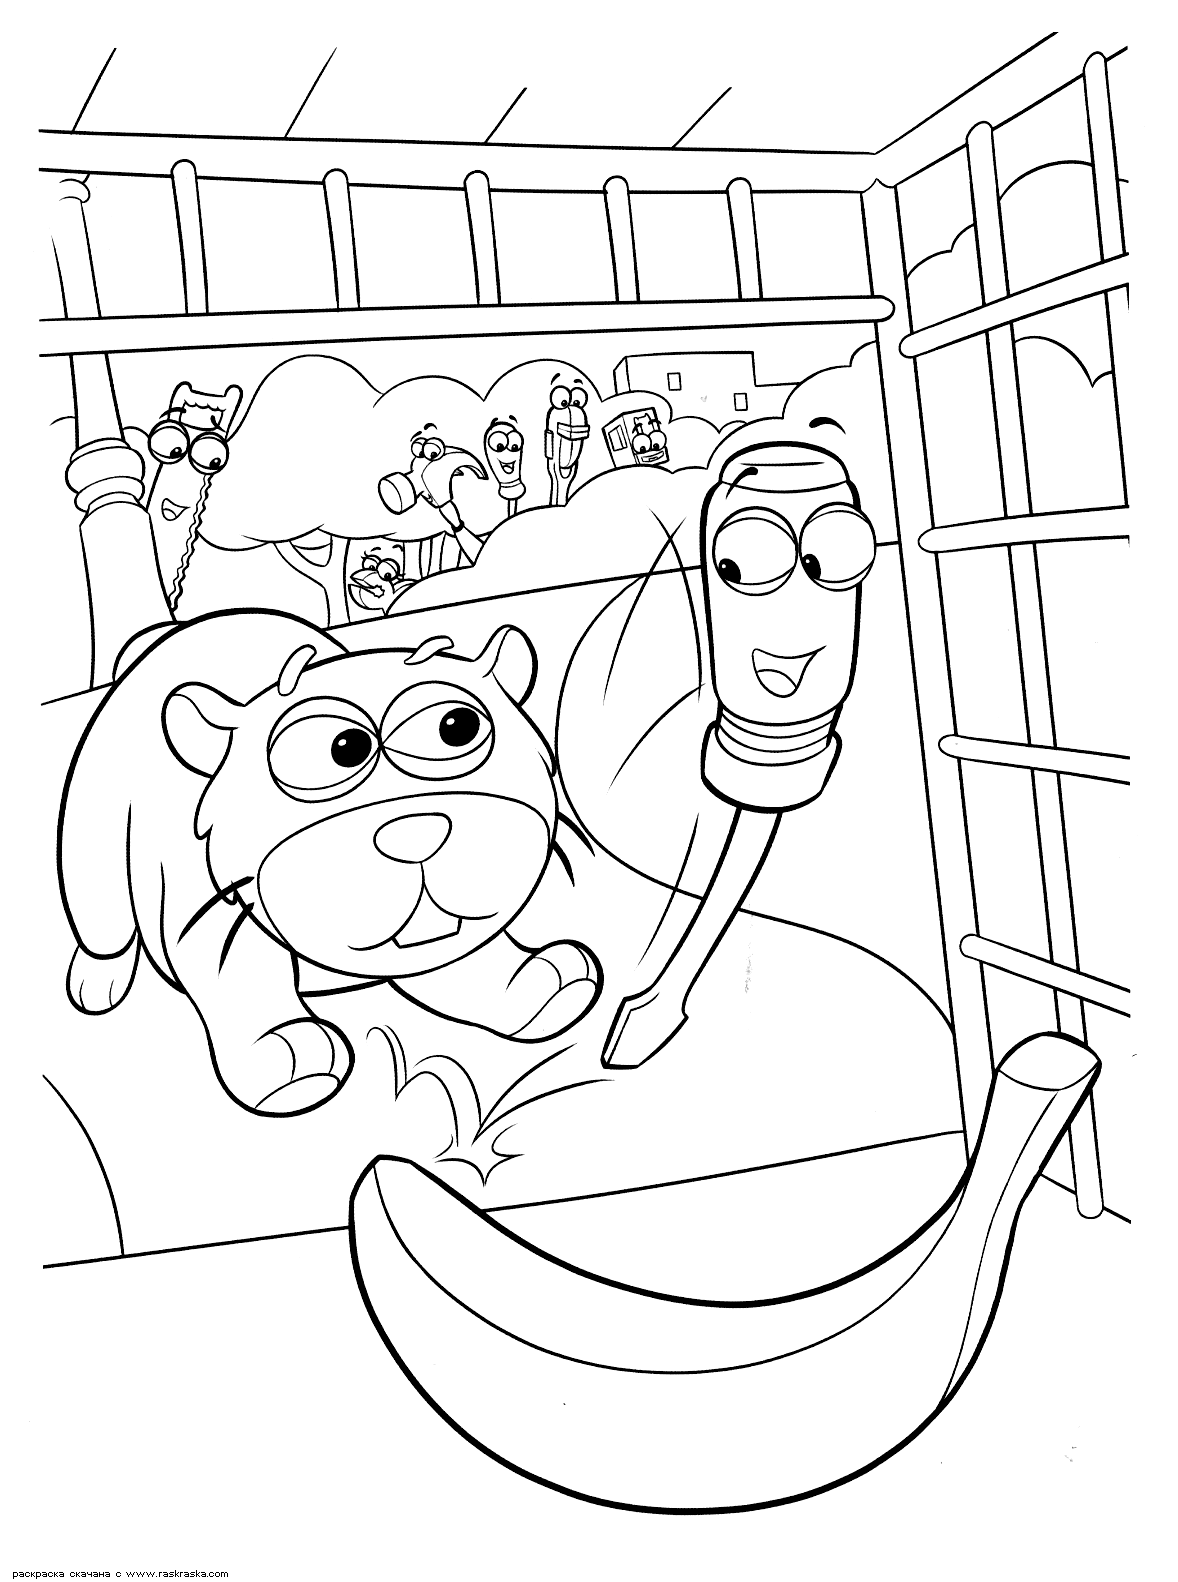 image-of-many-and-its-tools-to-download-and-color-handy-manny-kids-coloring-pages